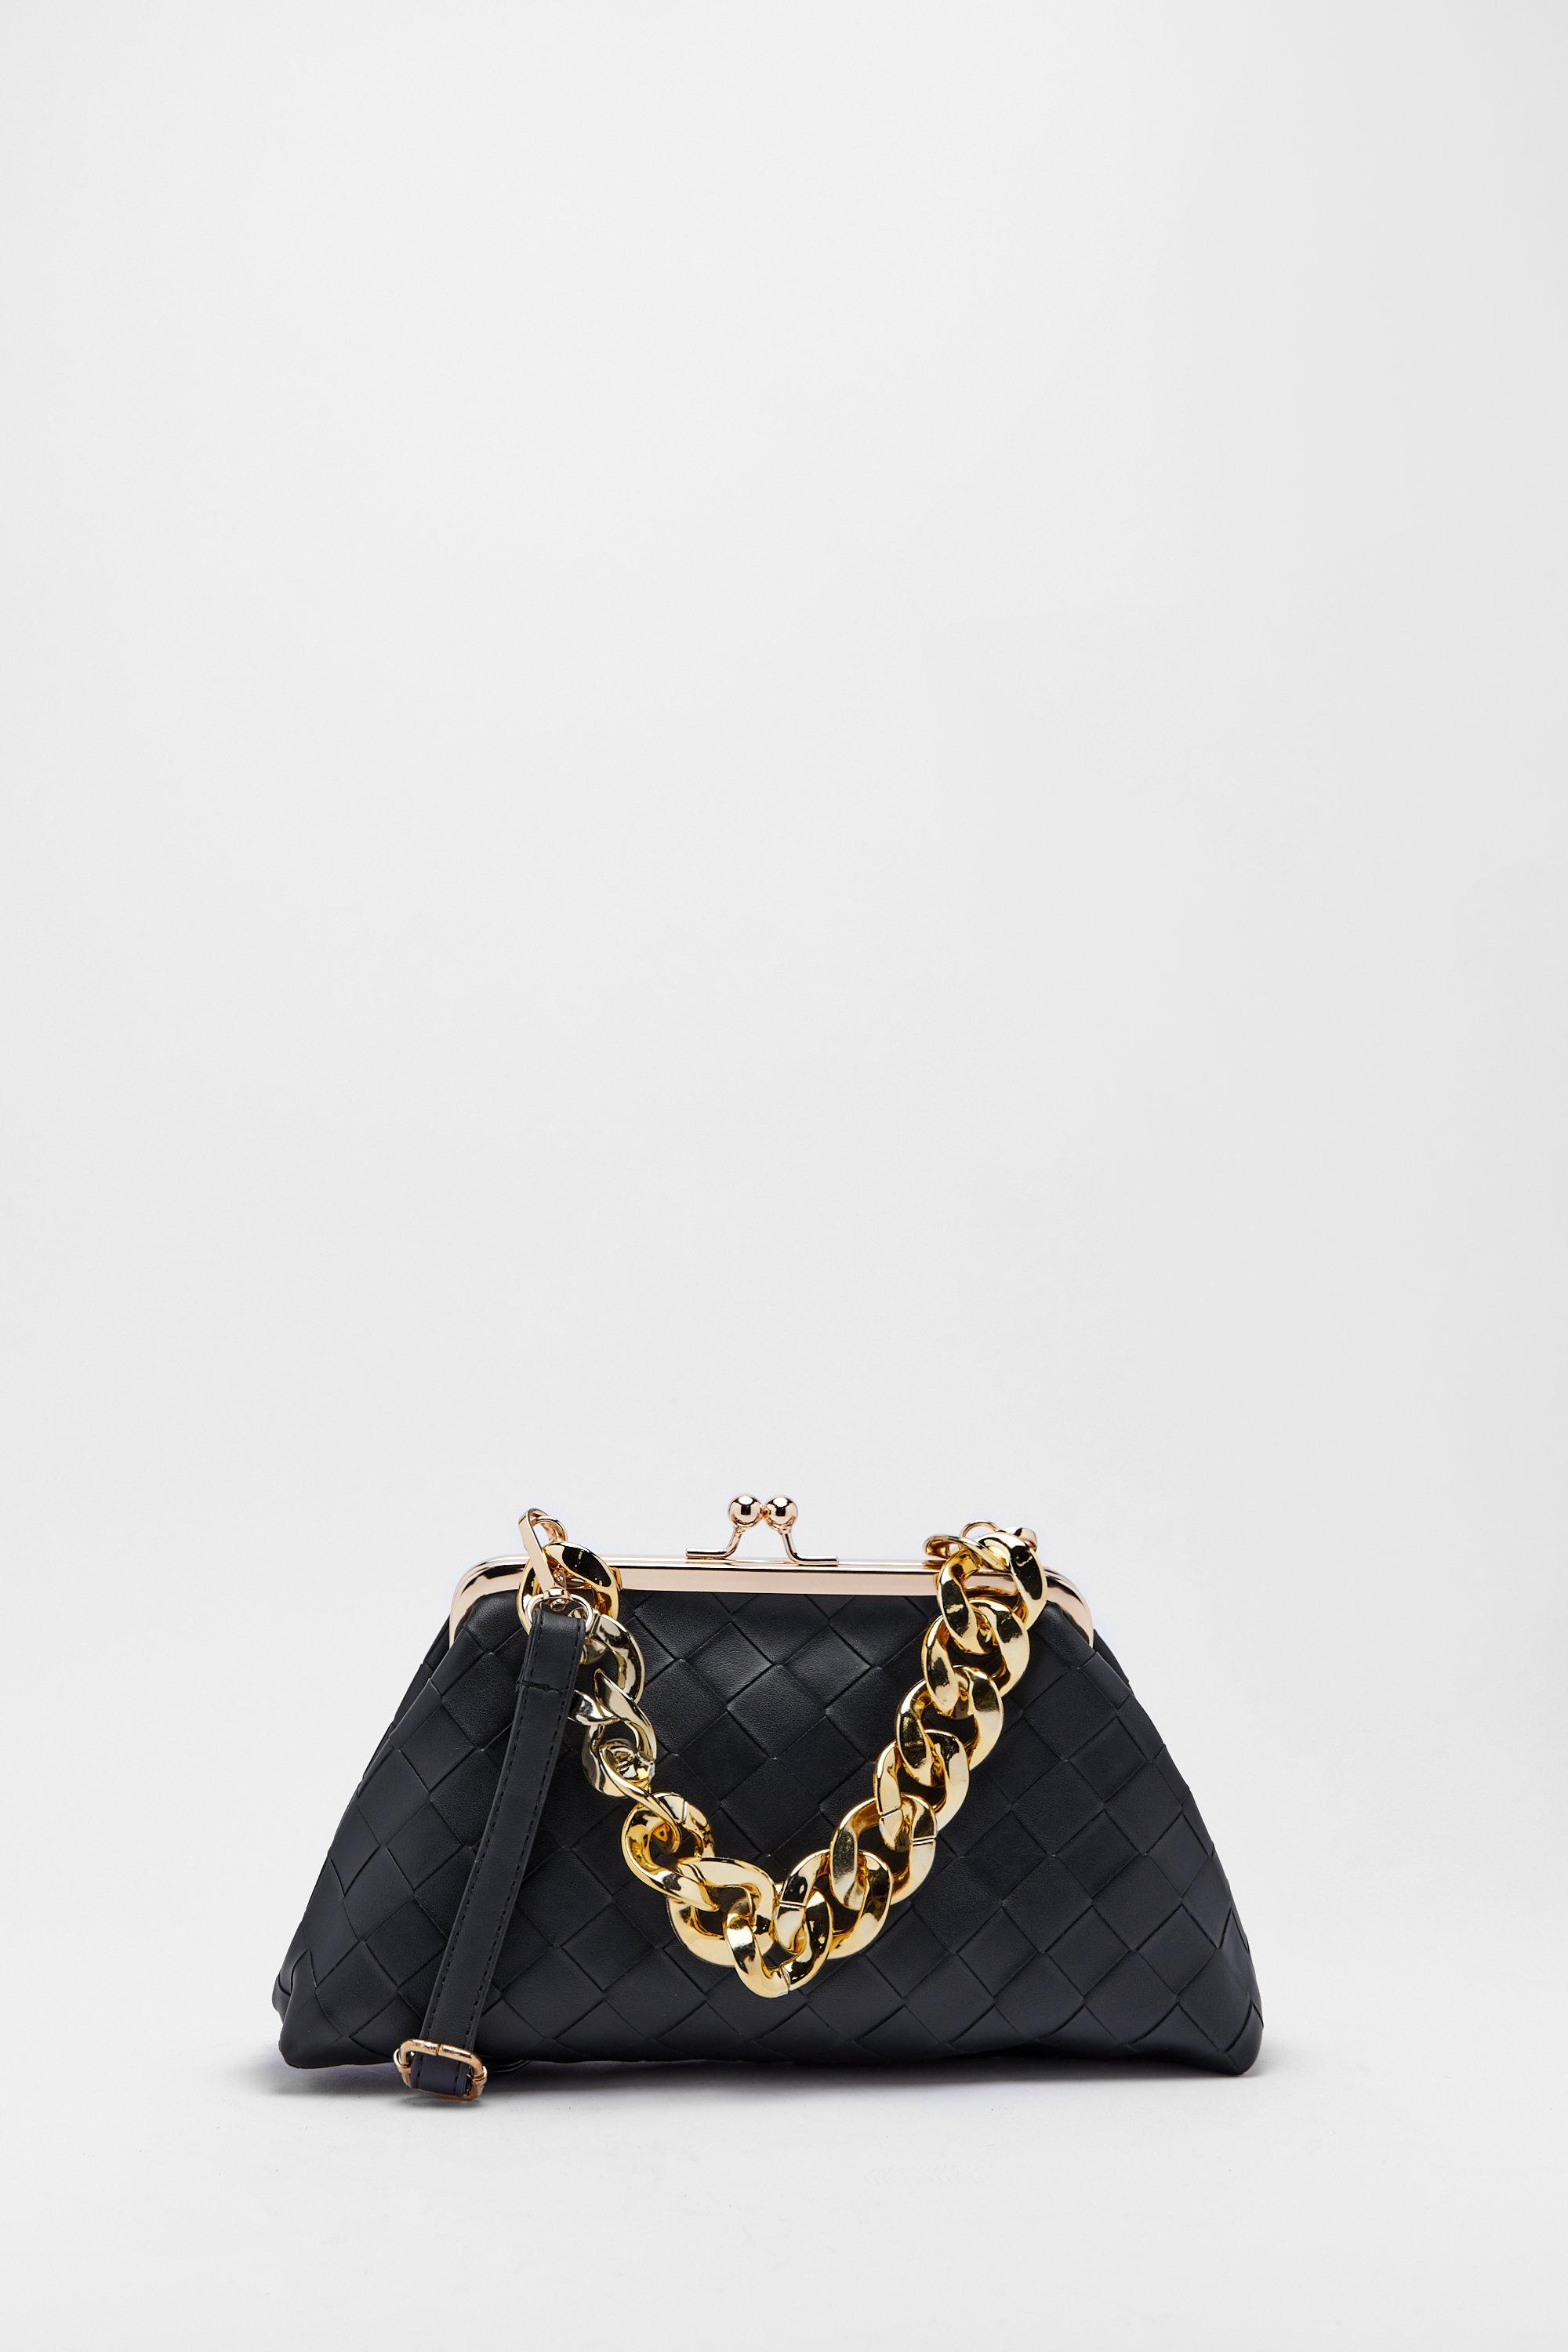 Black Faux Leather Tote Bag with Chain Strap